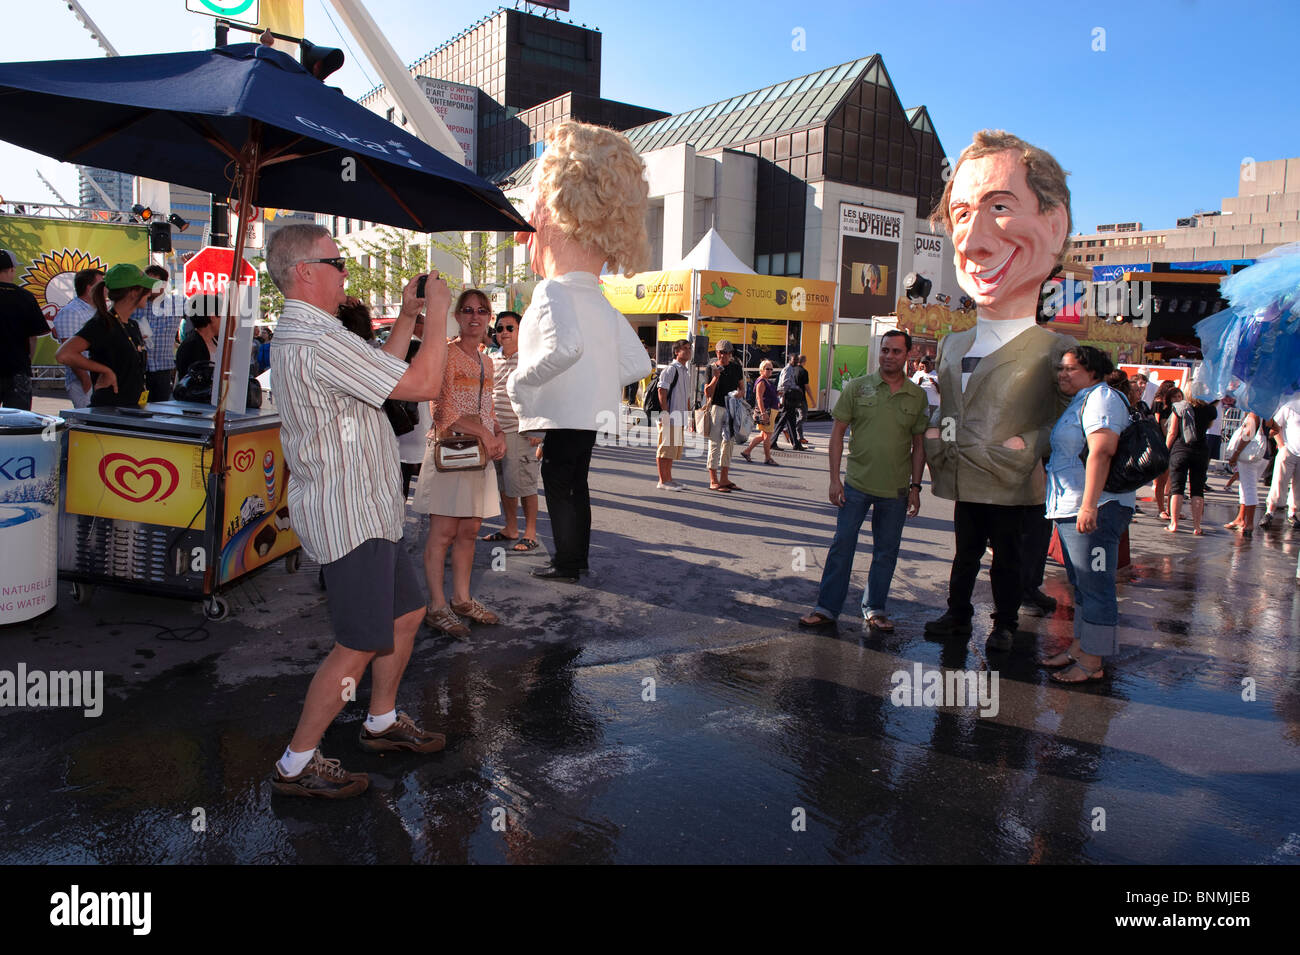 Man taking a picture of a couple accompanied by a giant head character during the Just for Laughs Festival in Montreal. Stock Photo